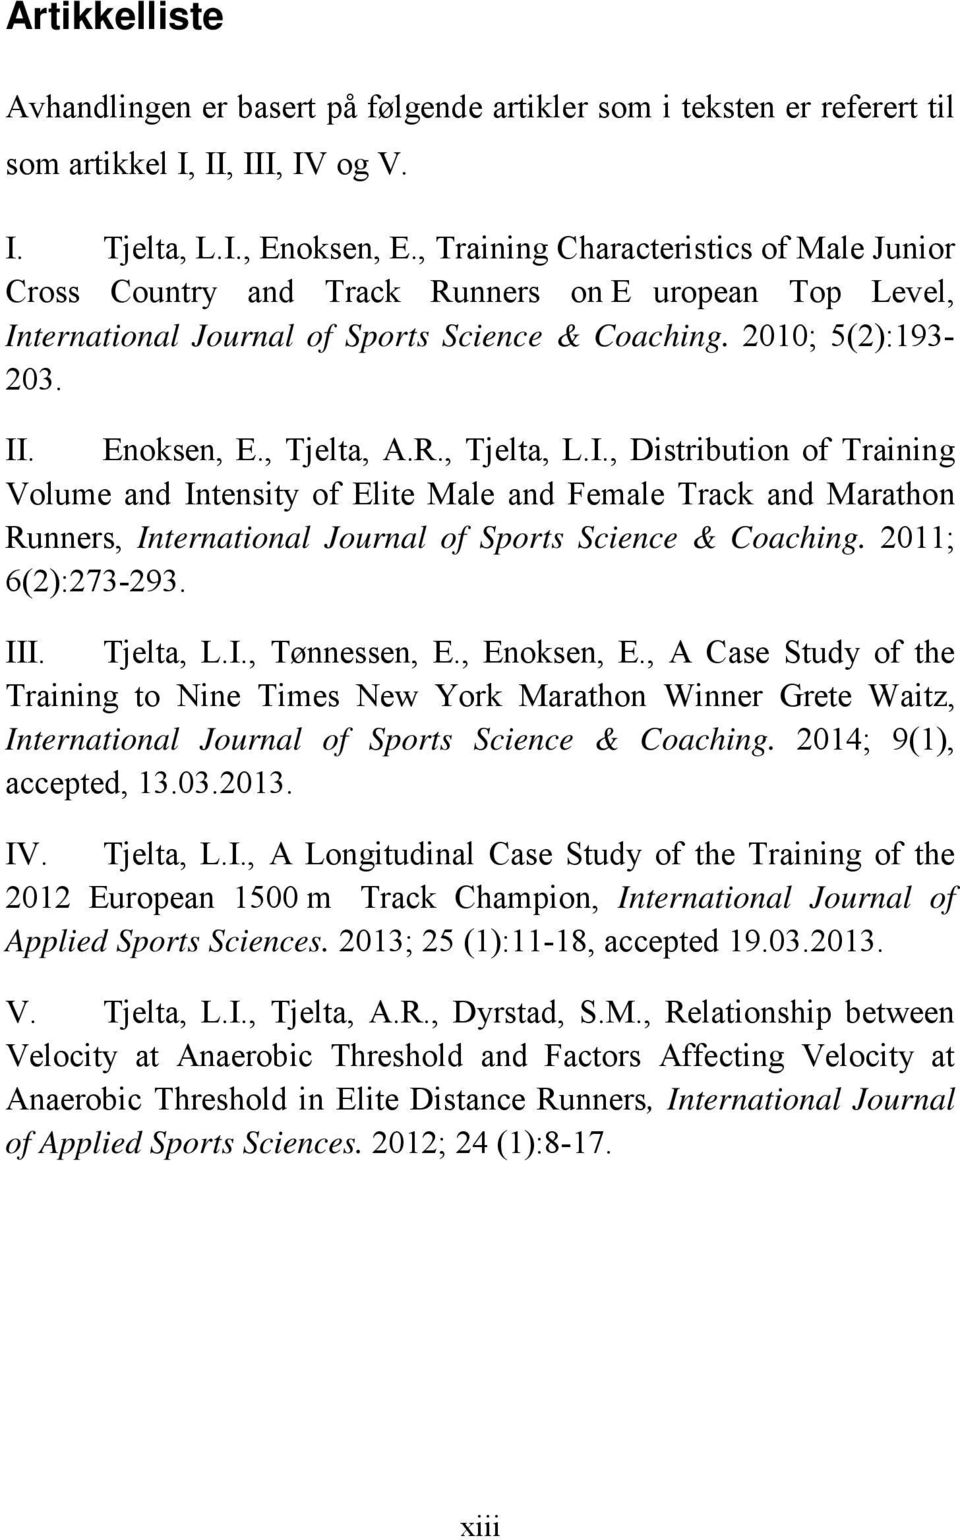 I., Distribution of Training Volume and Intensity of Elite Male and Female Track and Marathon Runners, International Journal of Sports Science & Coaching. 2011; 6(2):273-293. III. Tjelta, L.I., Tønnessen, E.